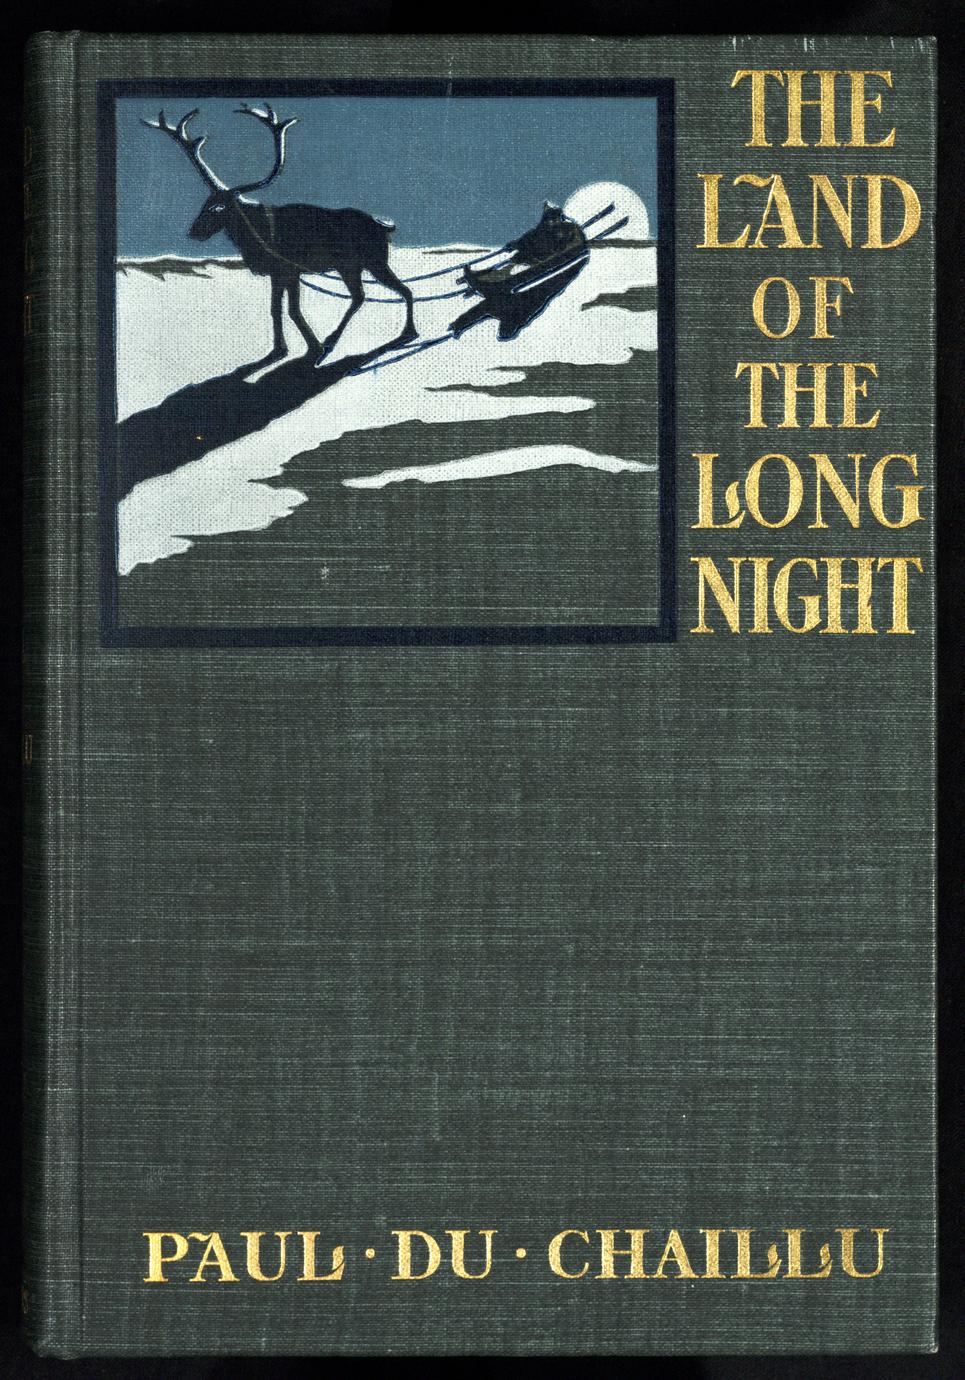 The land of the long night